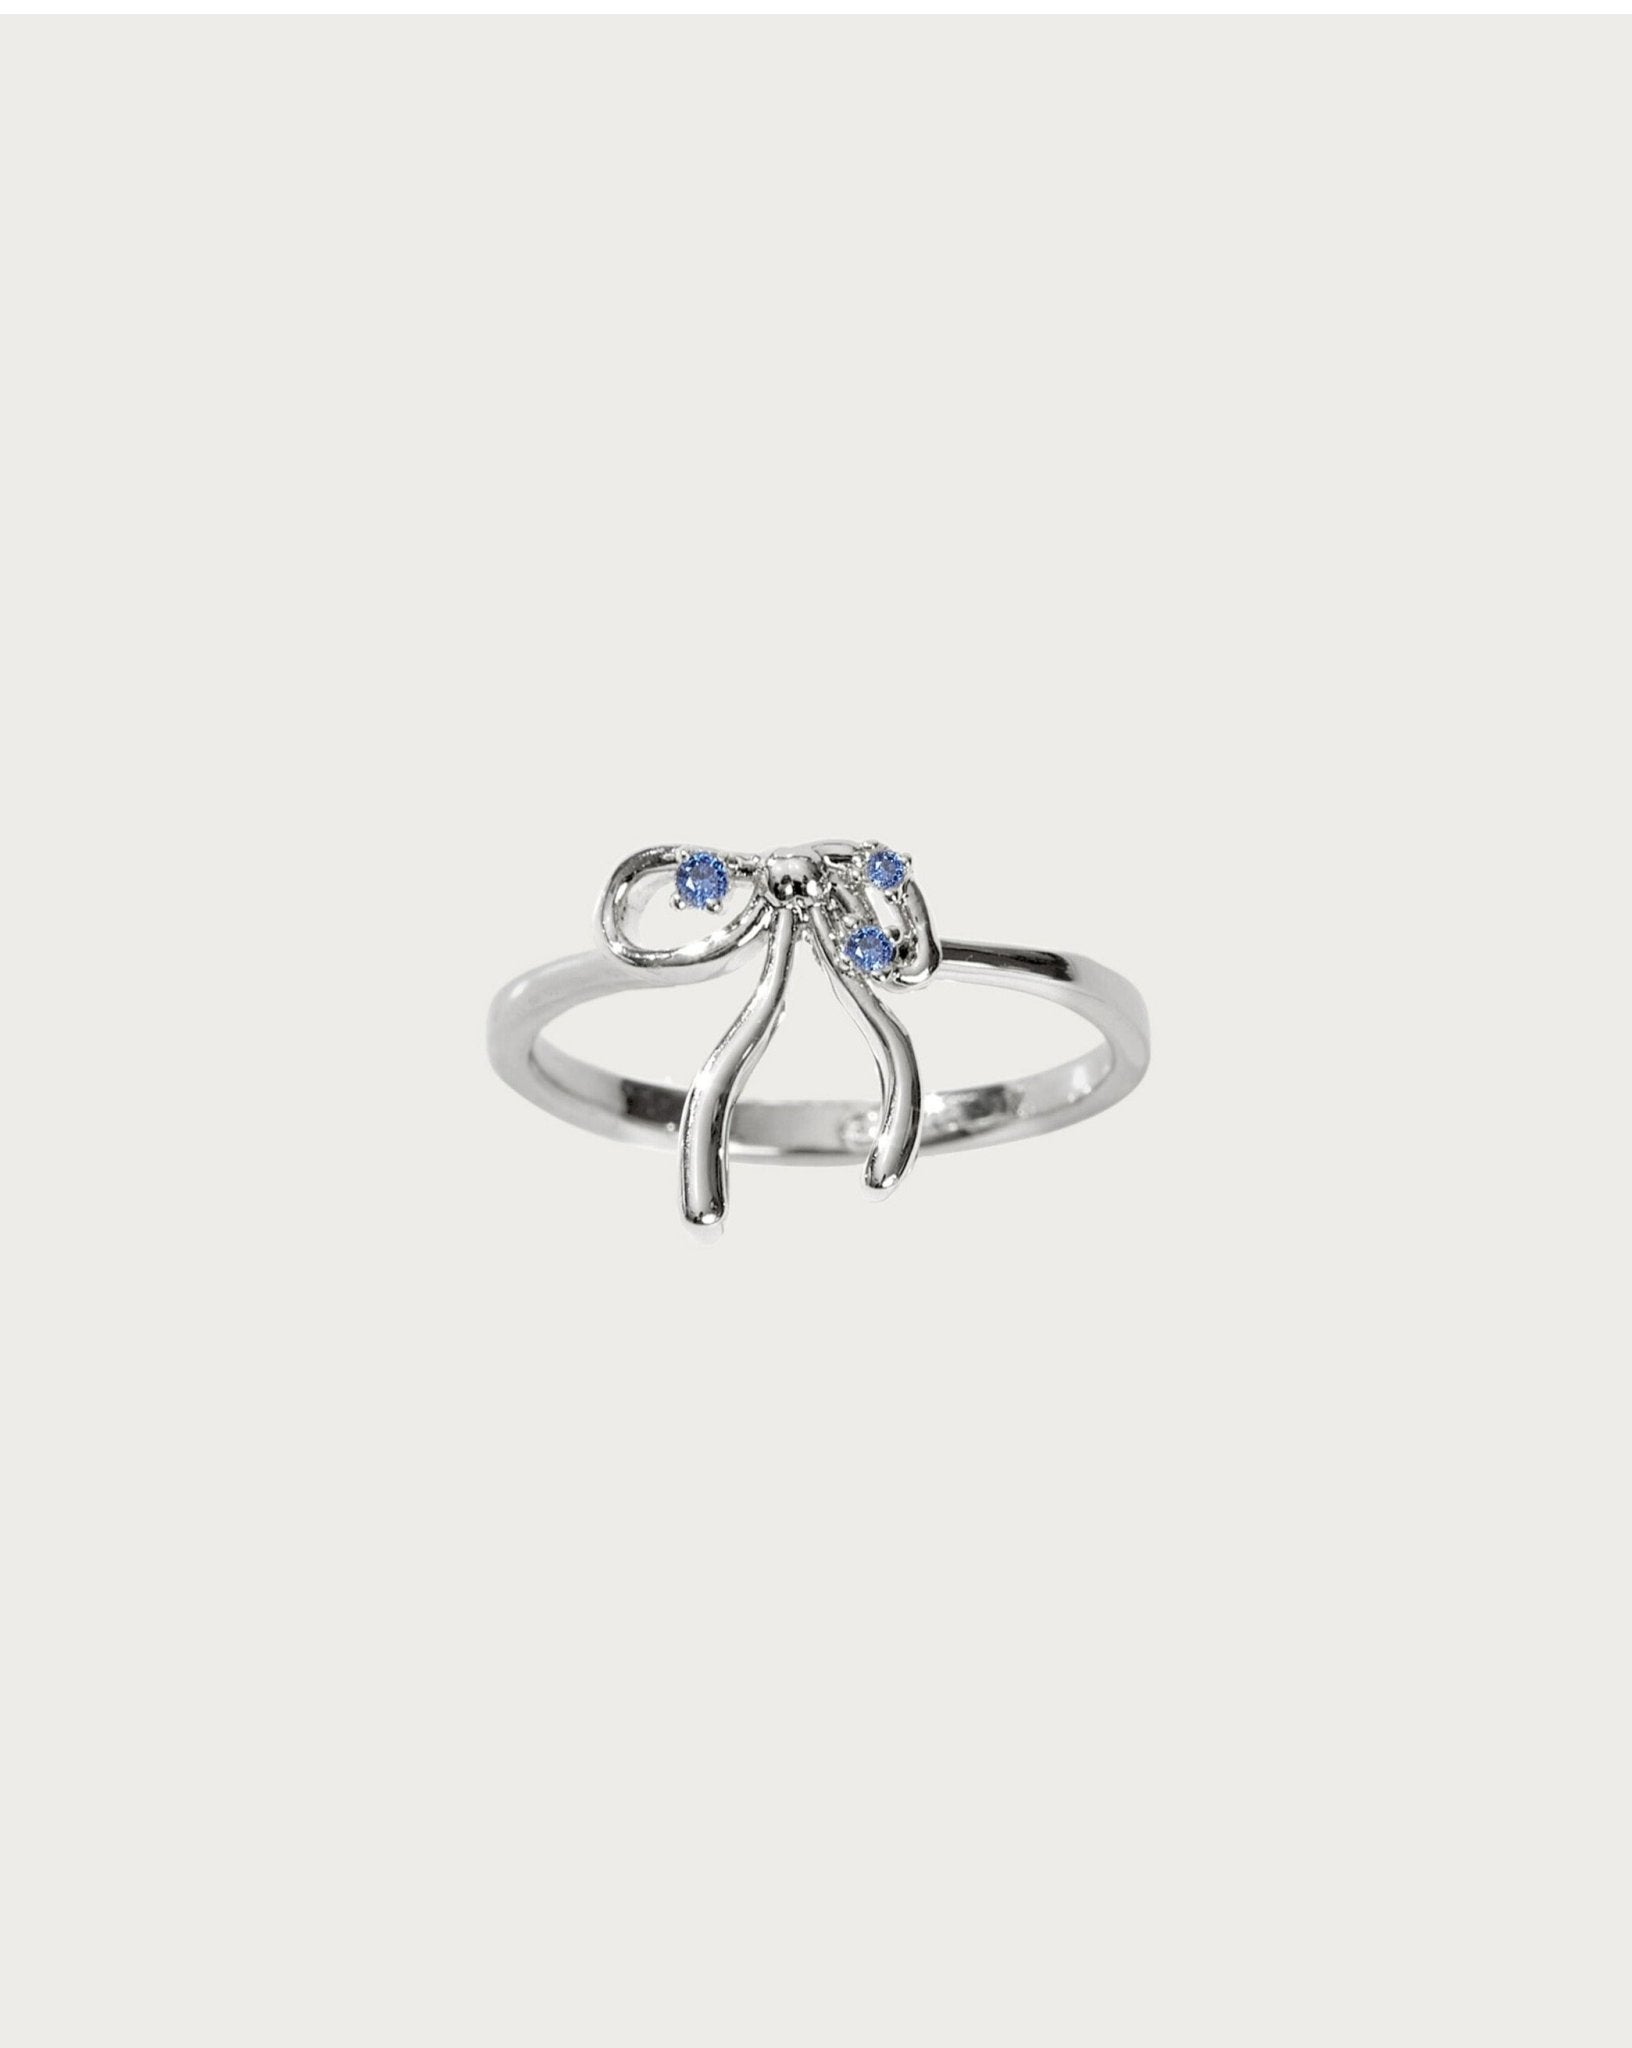 The Miffy Bague in Silver